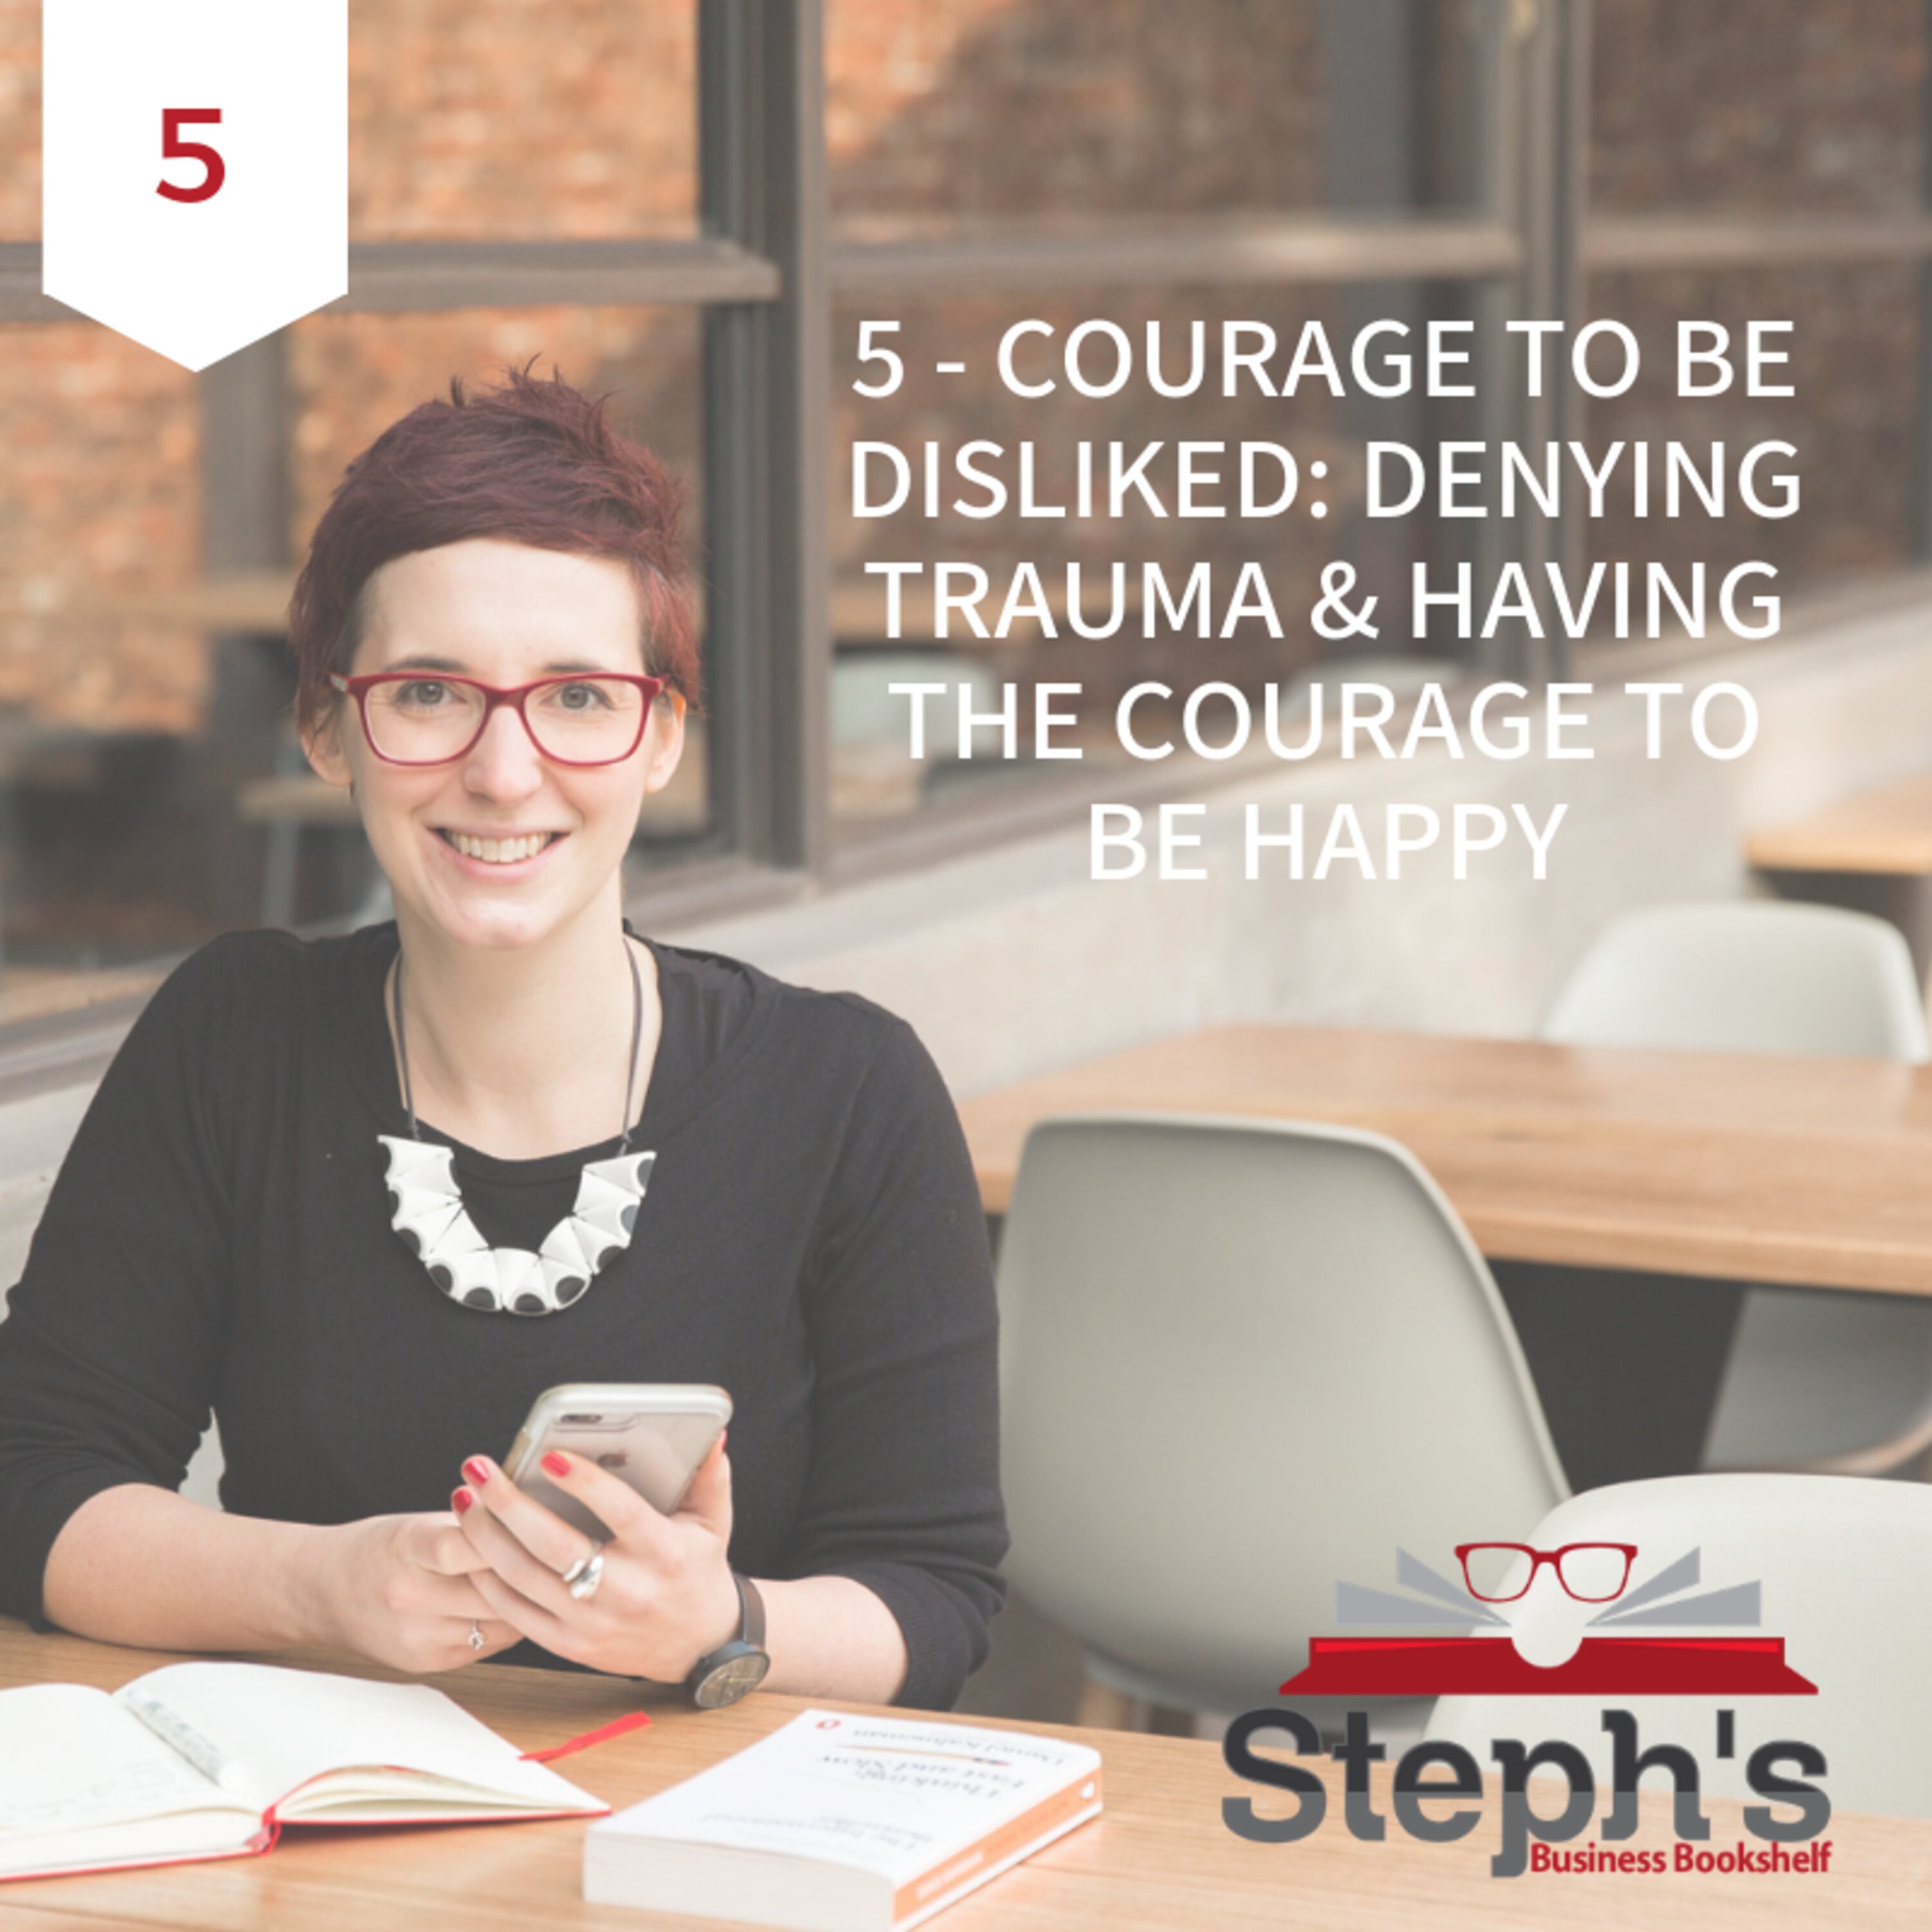 Courage to be Disliked by Ichiro Kishimi & Fumitake Koga: Denying trauma and having the courage to be happy